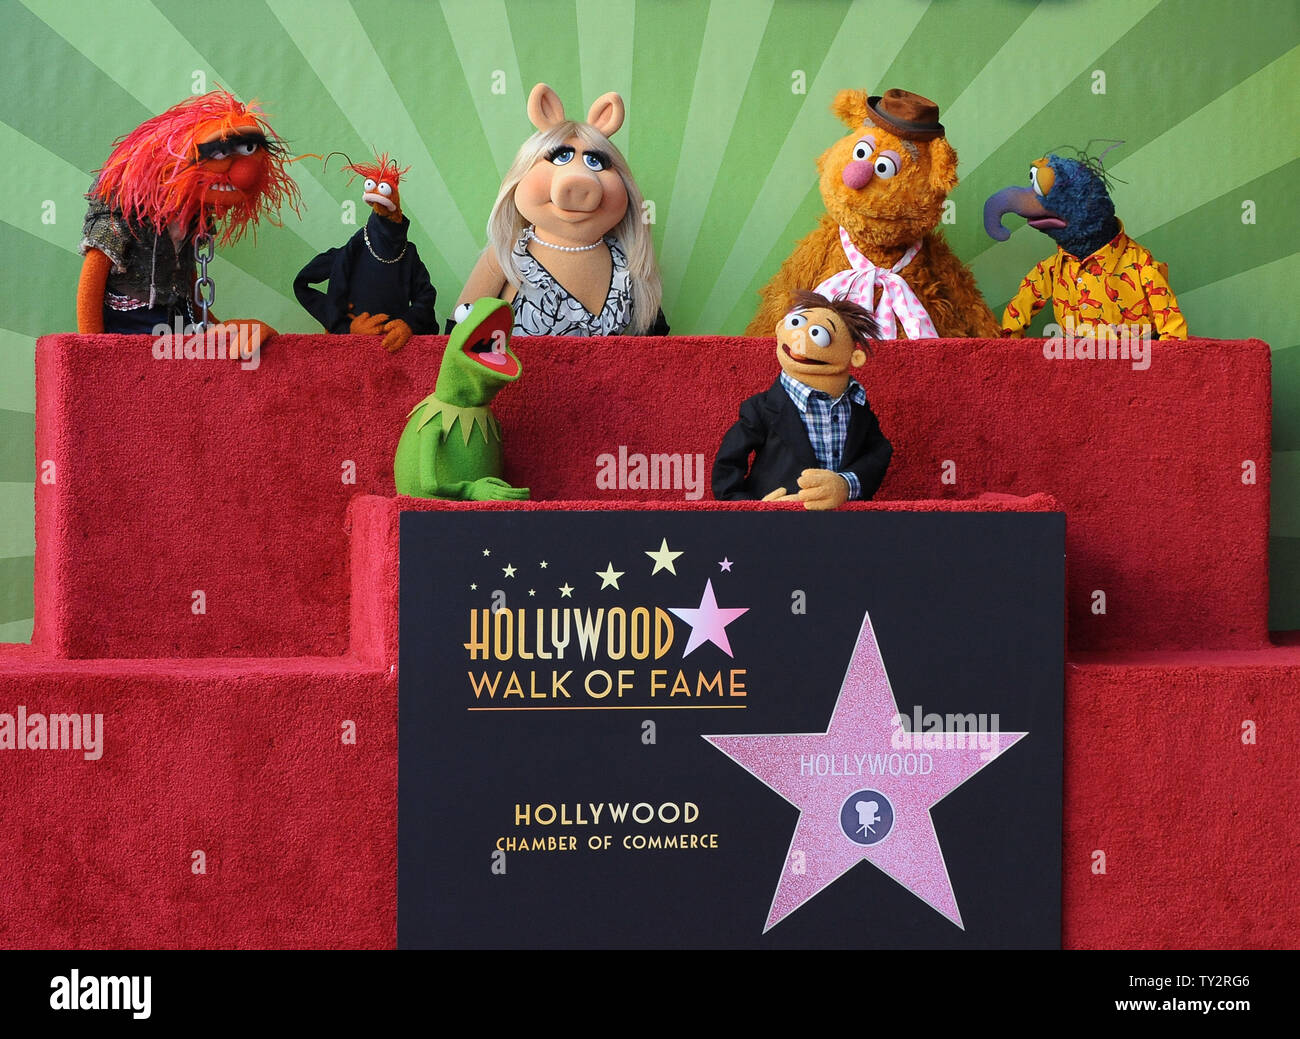 Muppets Animal, Pepe, Miss Piggy, Fozzie, Gonzo, (L-R, rear) and Kermit and Walter (L-R), foreground) attend the Inimitable Muppets unveiling ceremony honoring The Muppets  with the 2,466th star on the Hollywood Walk of Fame in Los Angeles on March 20, 2012. UPI/Jim Ruymen Stock Photo